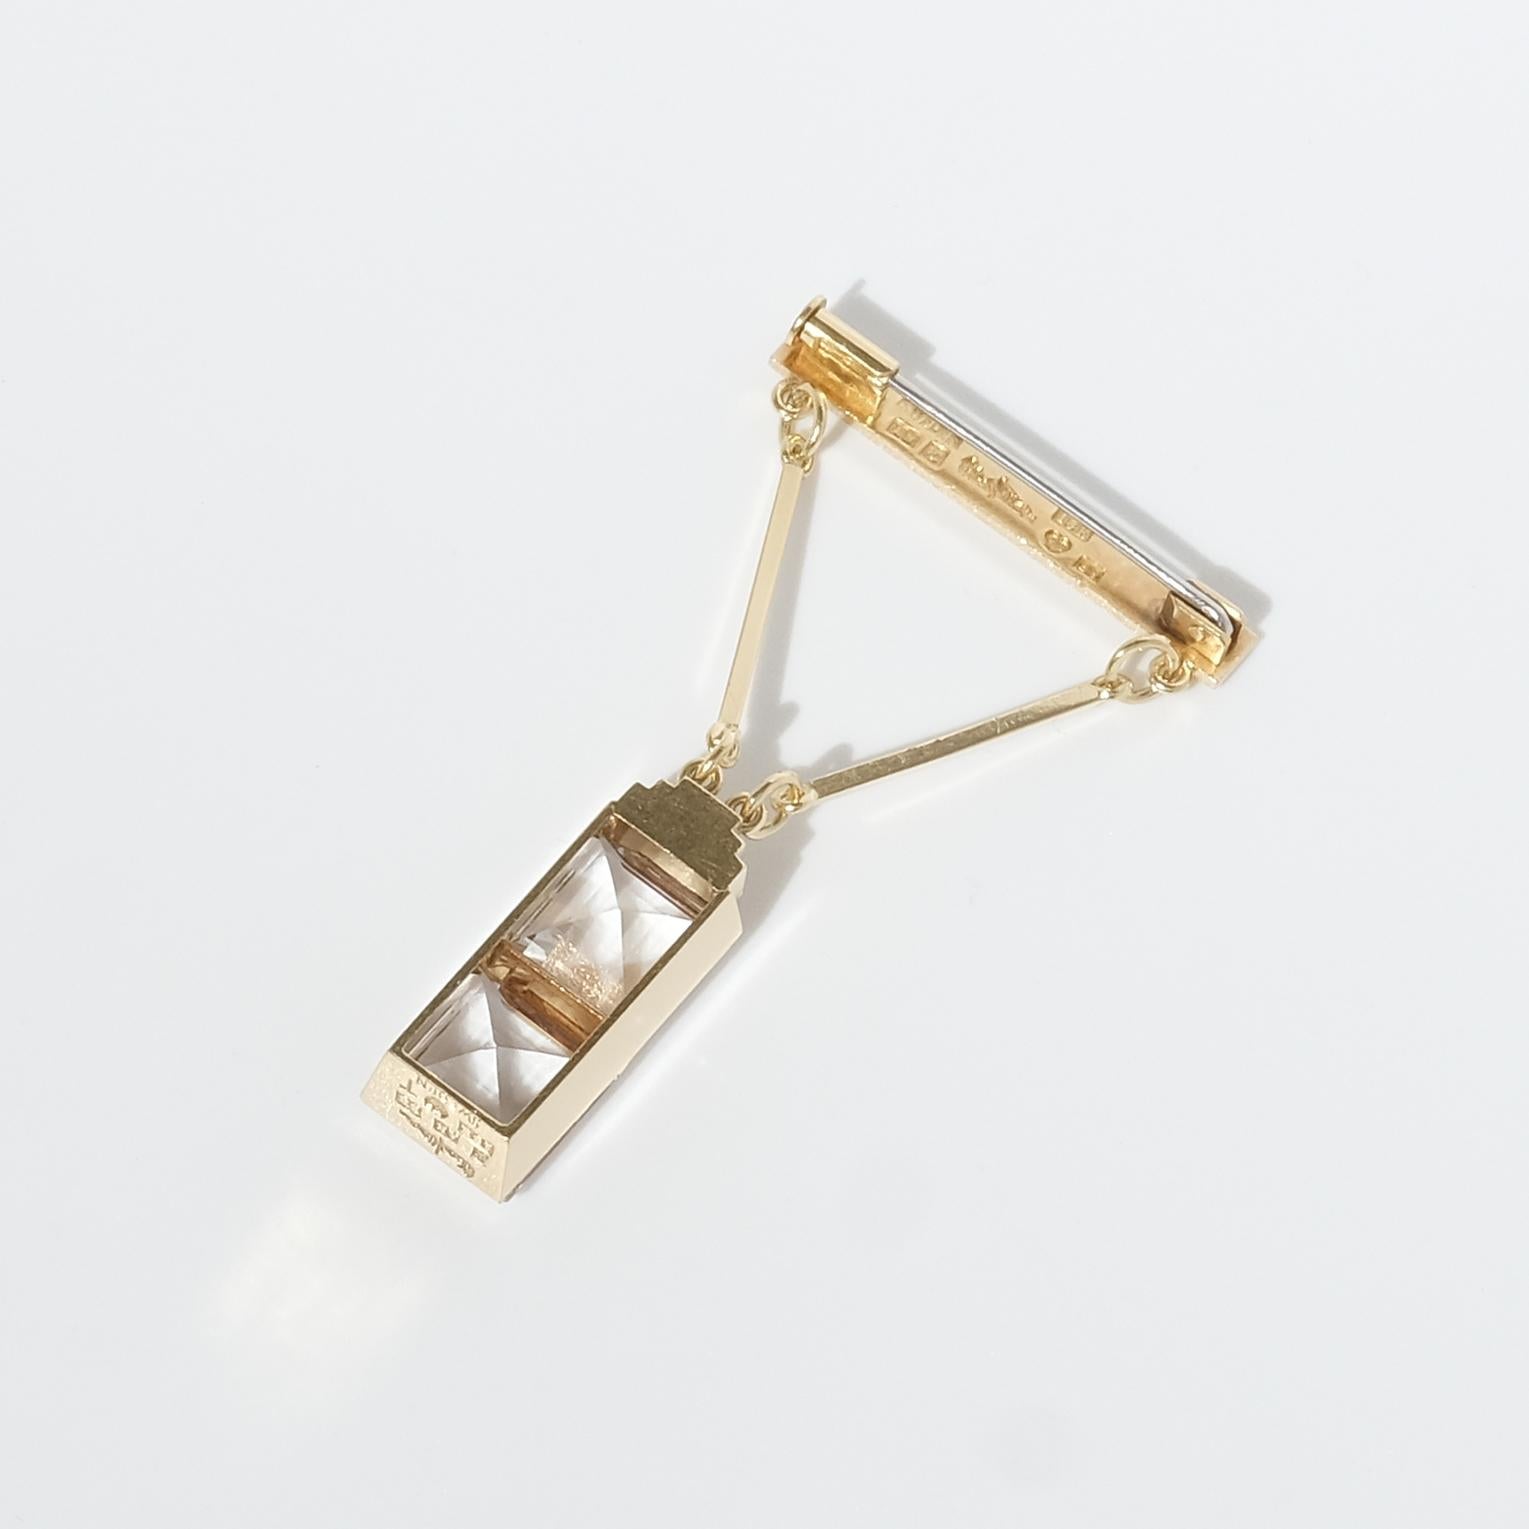 Brooch, 18k Gold with a Rock Crystal, Made 1944 by Wiwen Nilsson, Sweden For Sale 7